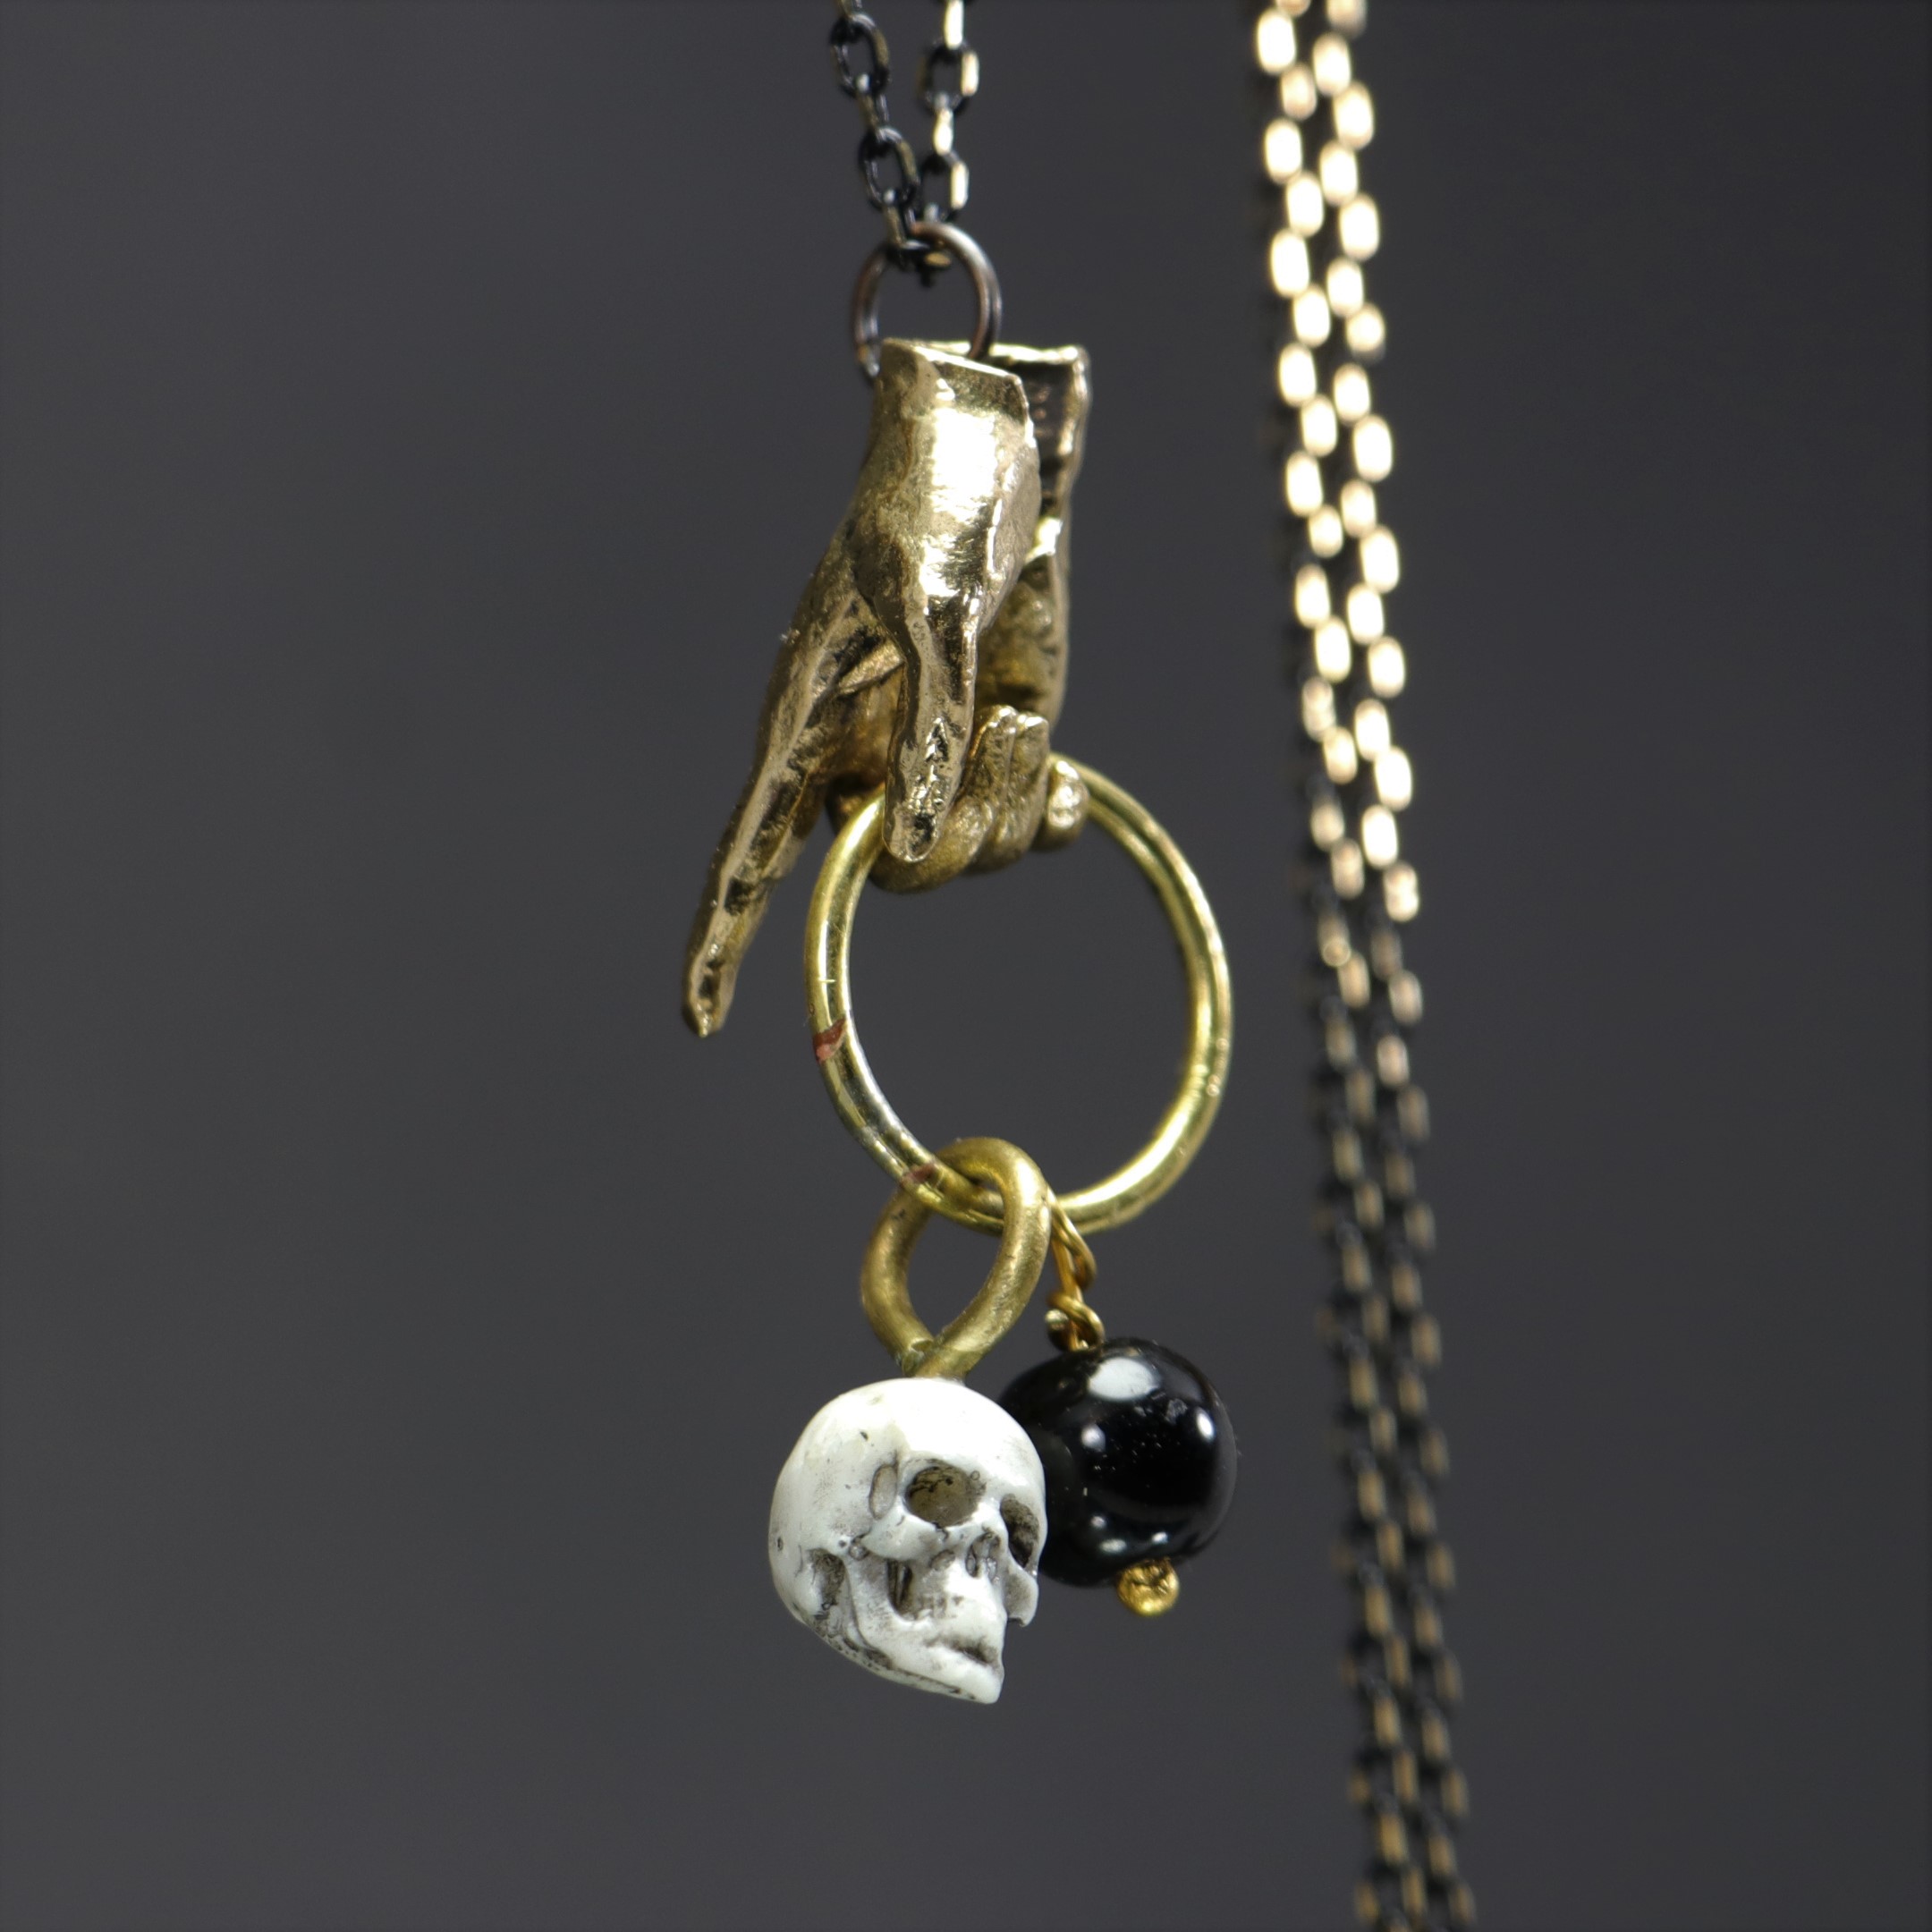 Hand and Skull Onyx Stone Necklace